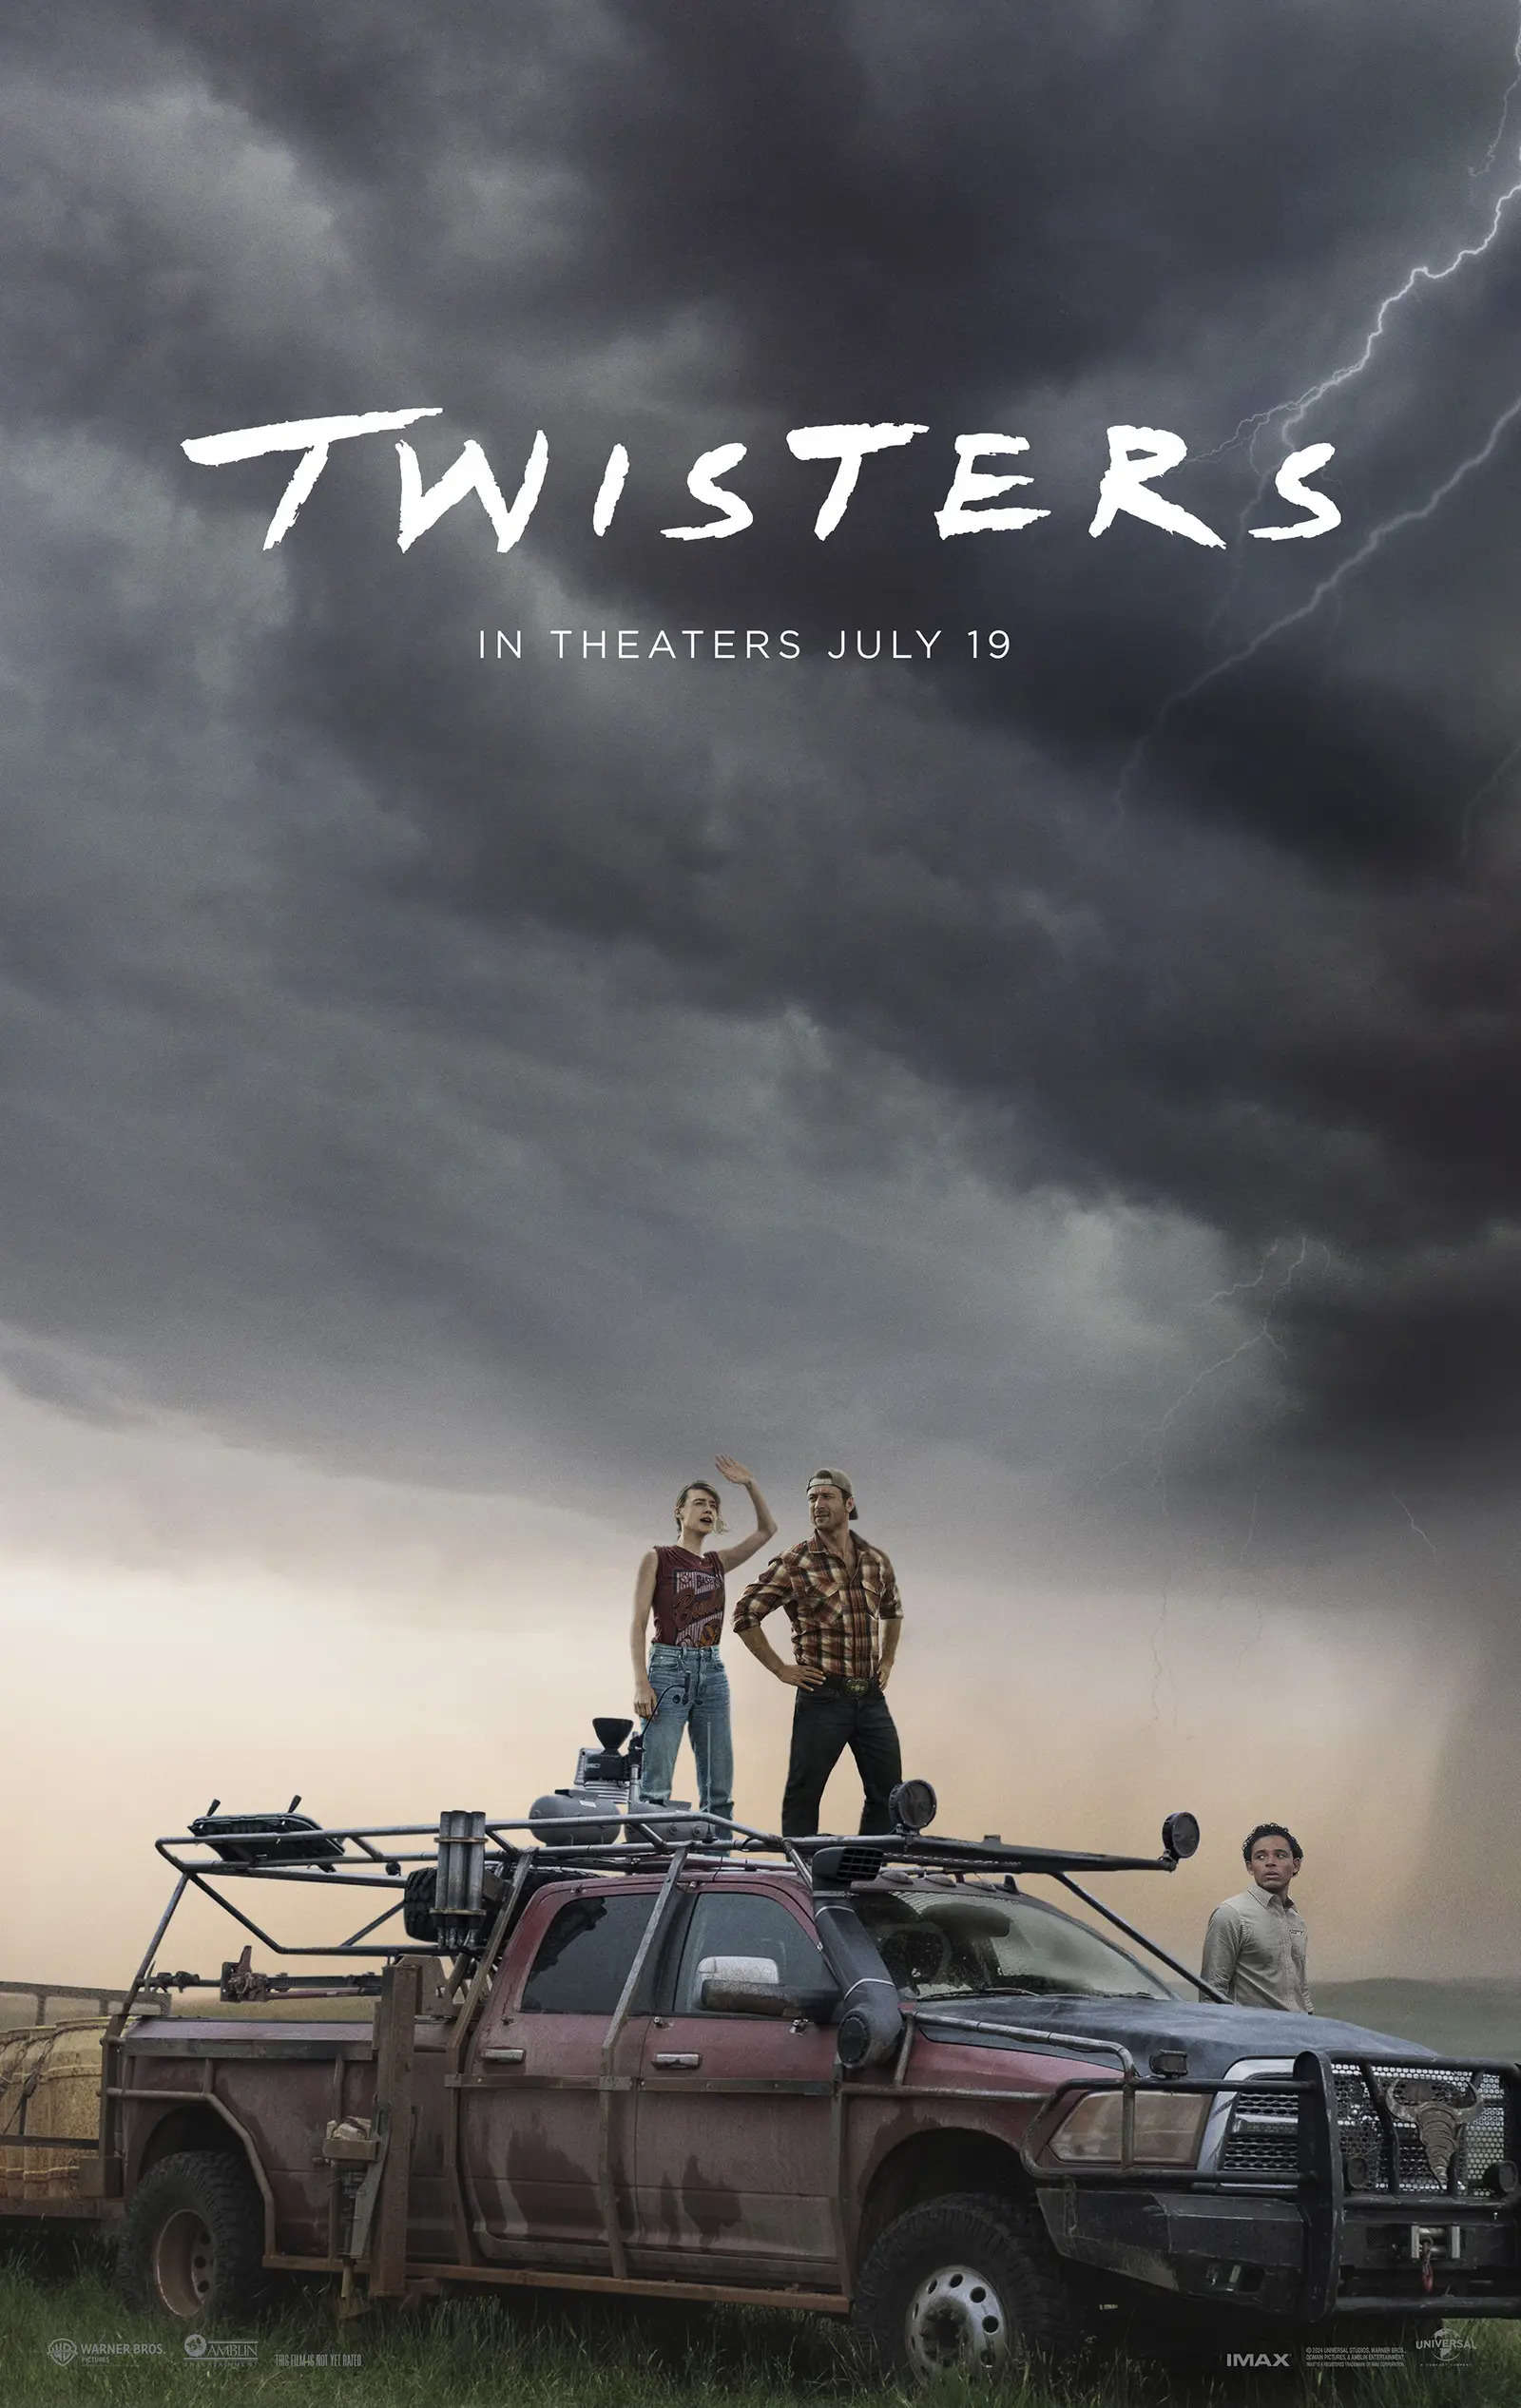 ‘Twisters’: Why this Hollywood natural disaster pic is raking in moolah at the box office? 